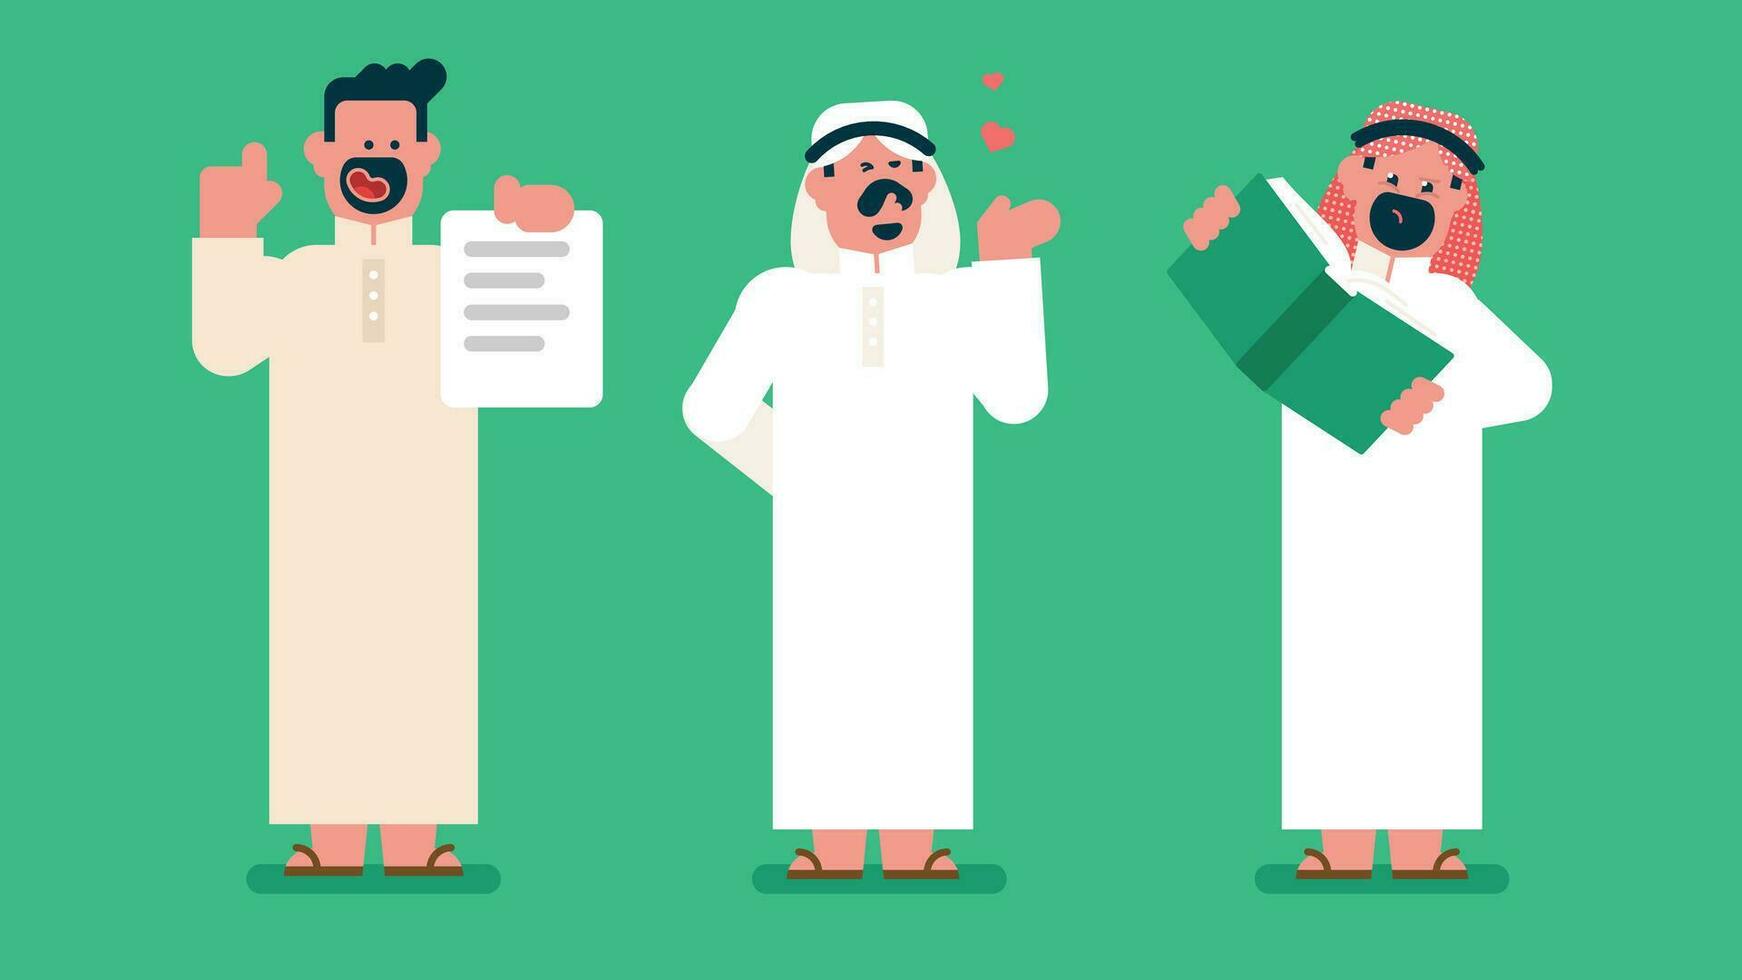 Arabic businessman character. Different poses and emotions, Young handsome Emirati business man in UAE traditional outfit, arab man with kandora ,Islamic head scarf, Flat avatar vector illustration.